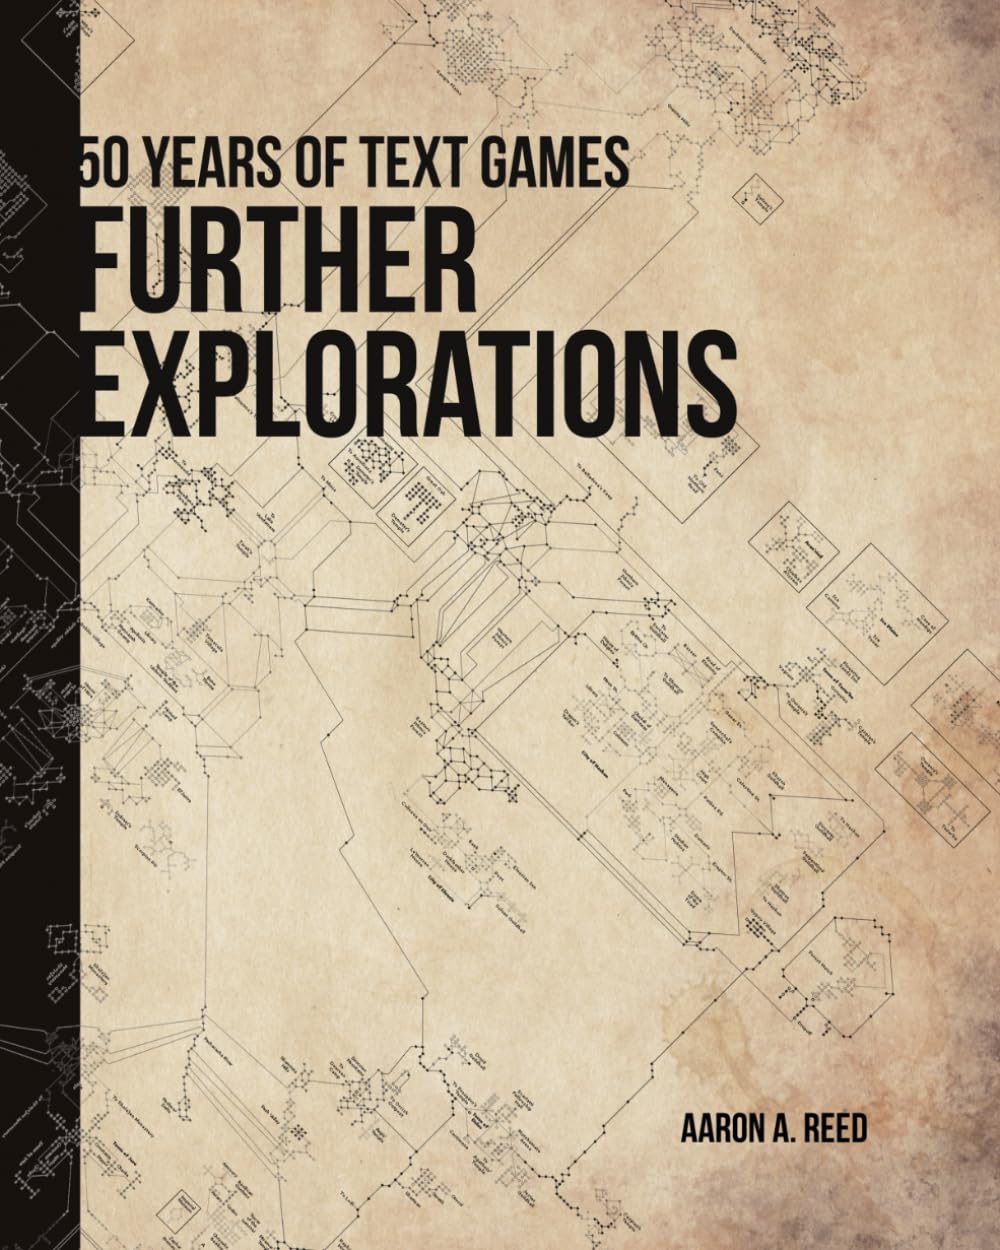 Aaron A. Reed: Further Explorations: 50 Years of Text Games (Changeful Tales)